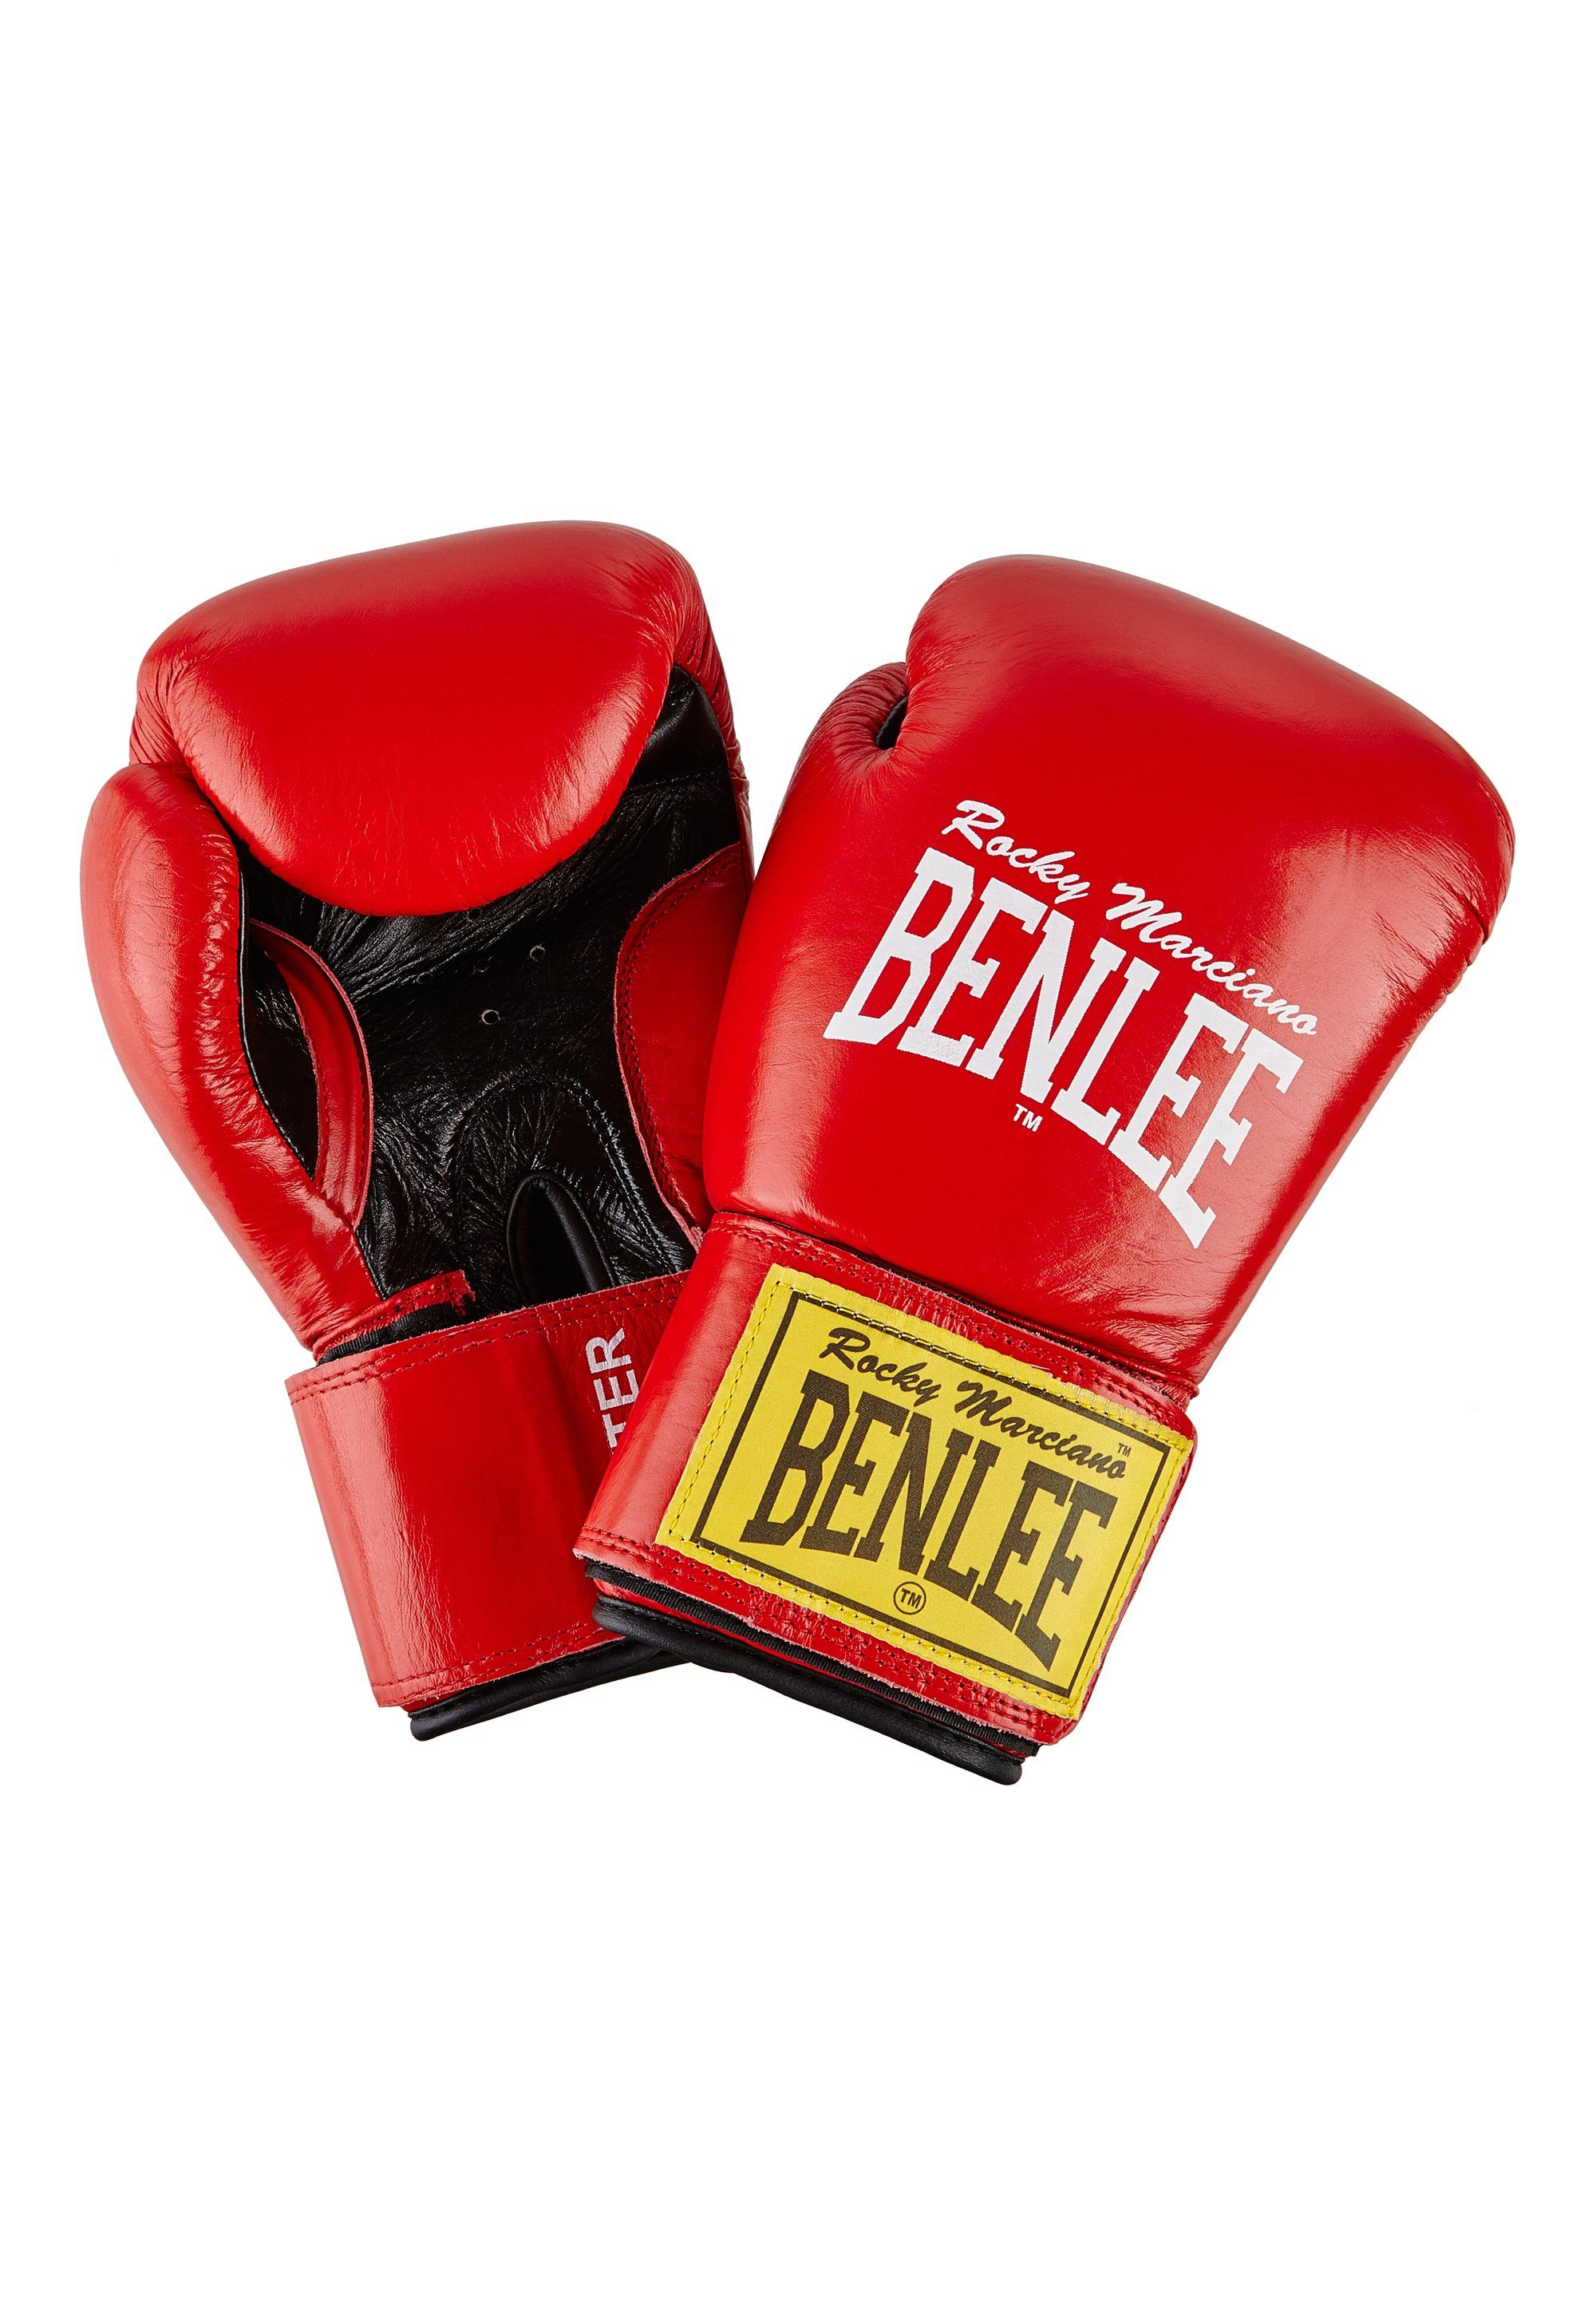 Benlee Rocky Marciano Boxhandschuhe Red/Black FIGHTER